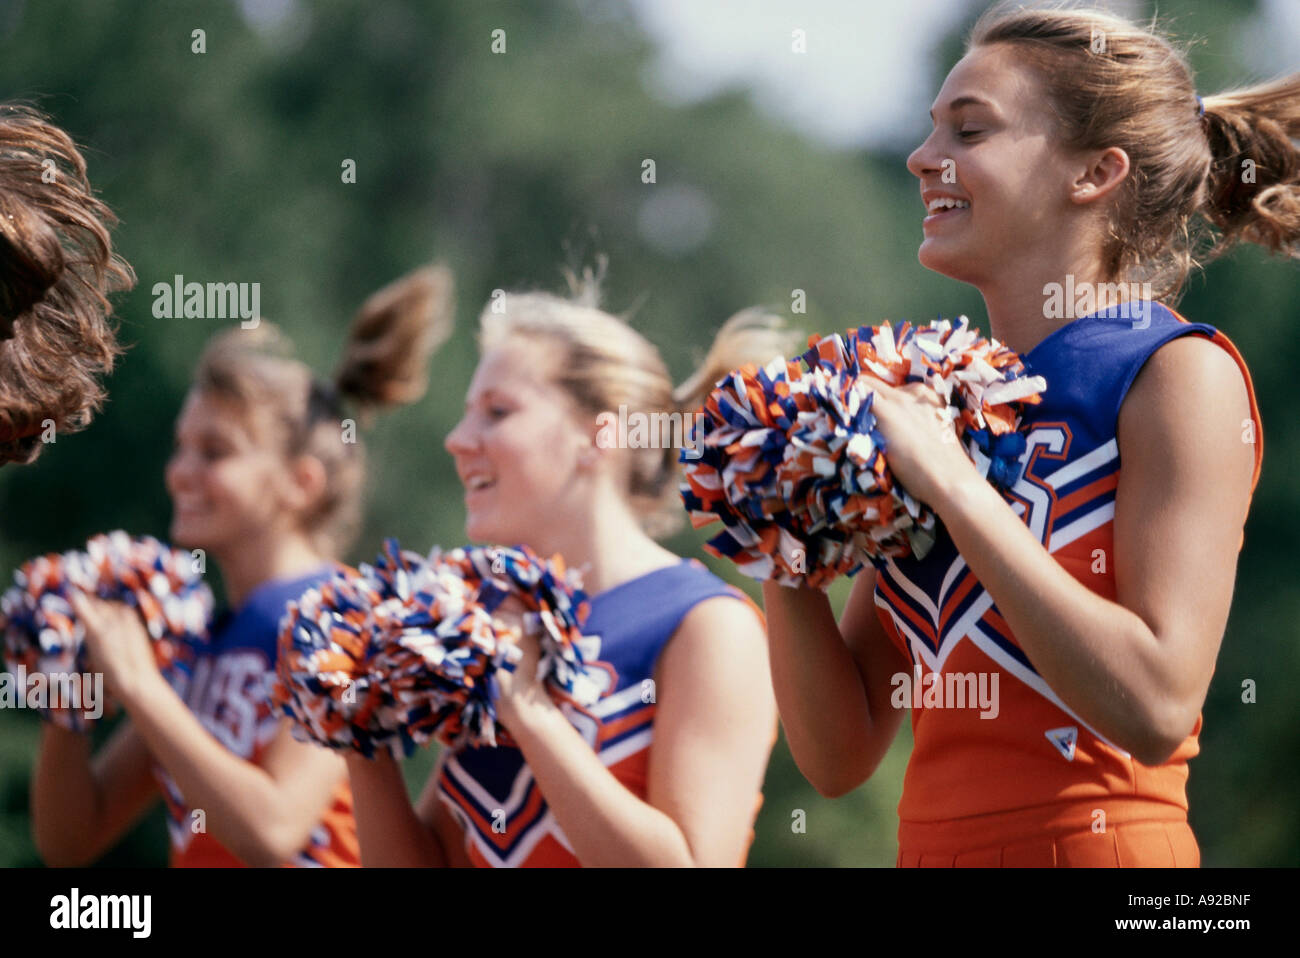 Cheerleaders In Uniform Holding Pom-Poms Stock Photo, Picture and Royalty  Free Image. Image 5428495.